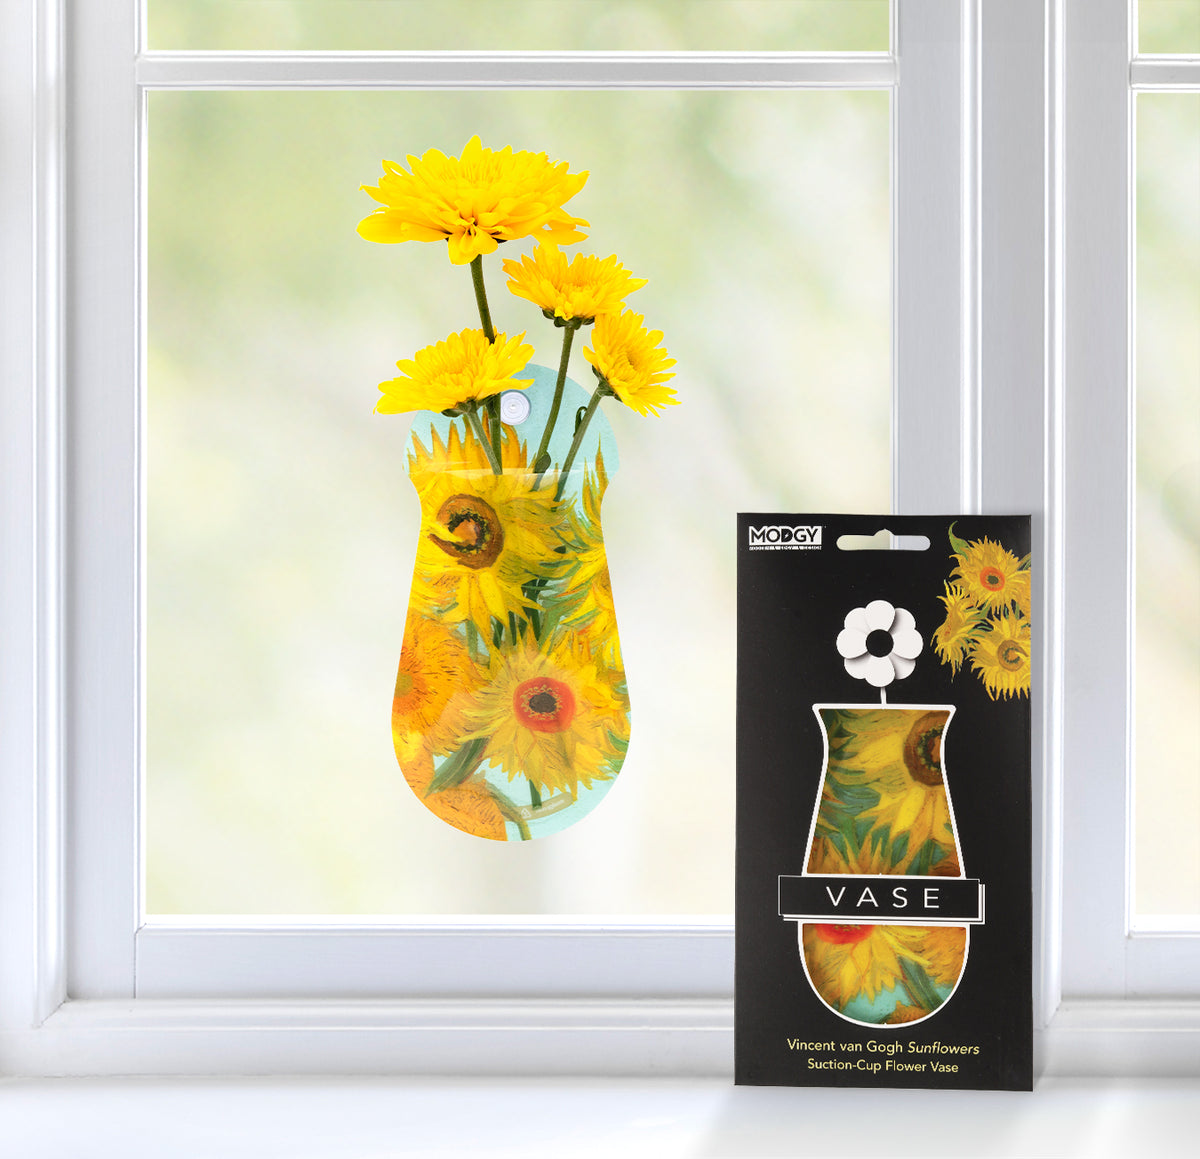 Modgy Suction Cup Vase